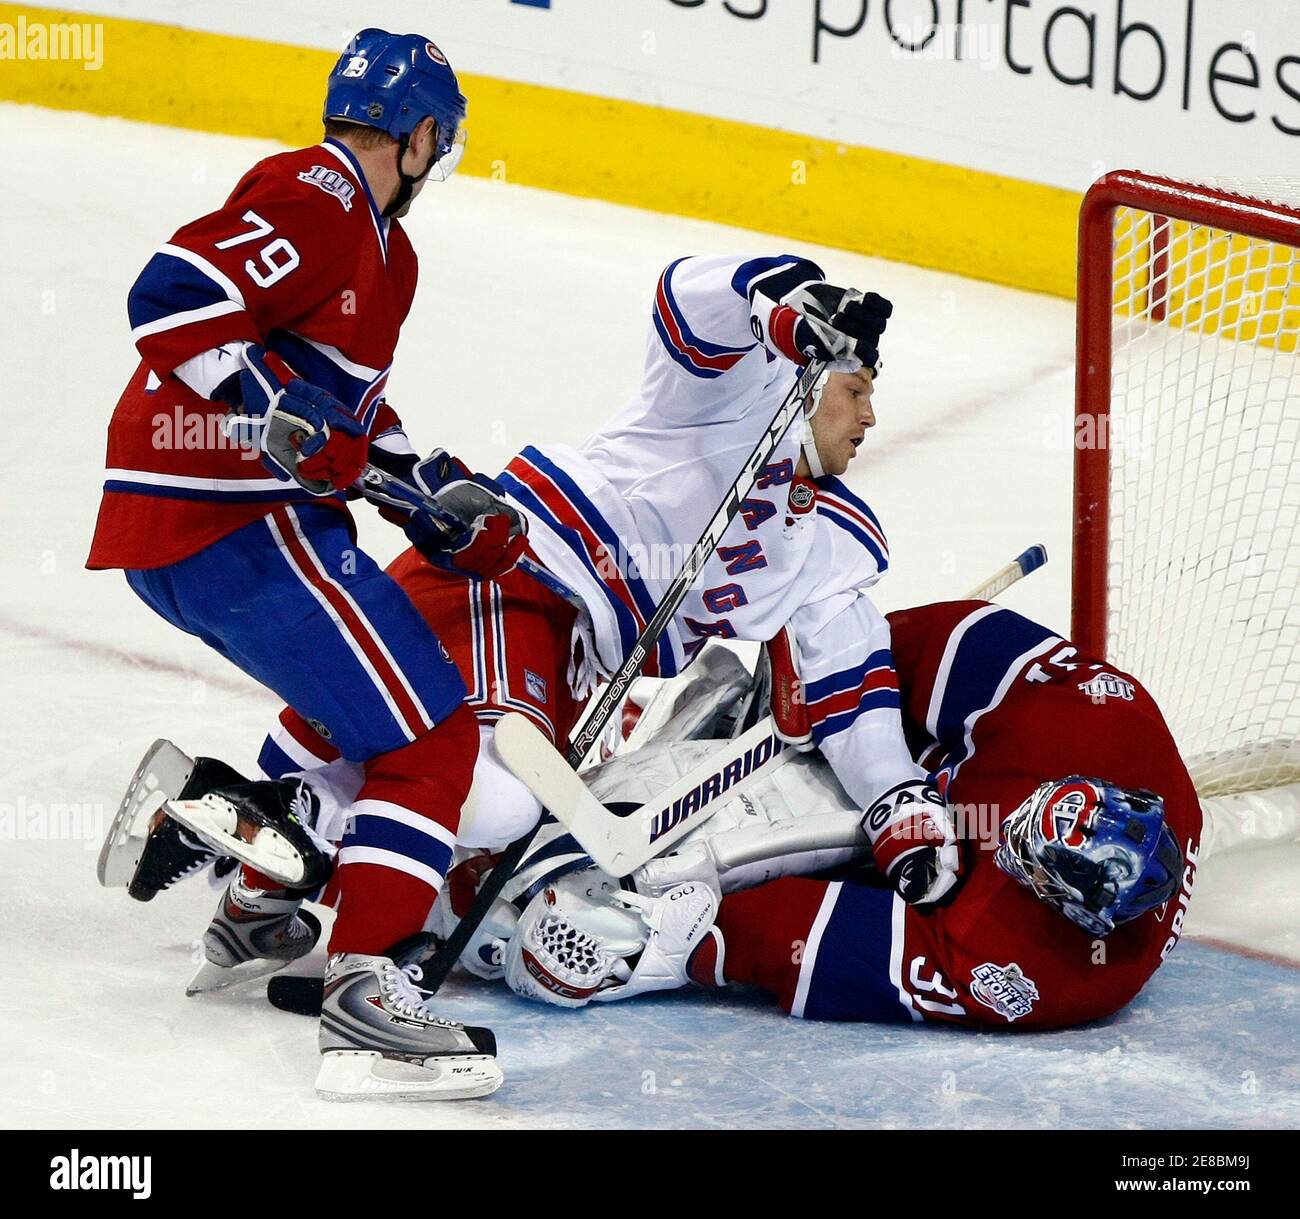 New York Rangers Sean Avery (C) collides with Montreal Canadiens goaltender Carey Price (31), as Canadiens' Andrei Markov (79) skates in, during first period NHL hockey action in Montreal March 17, 2009.  REUTERS/Christinne Muschi (CANADA SPORT ICE HOCKEY) Stock Photo